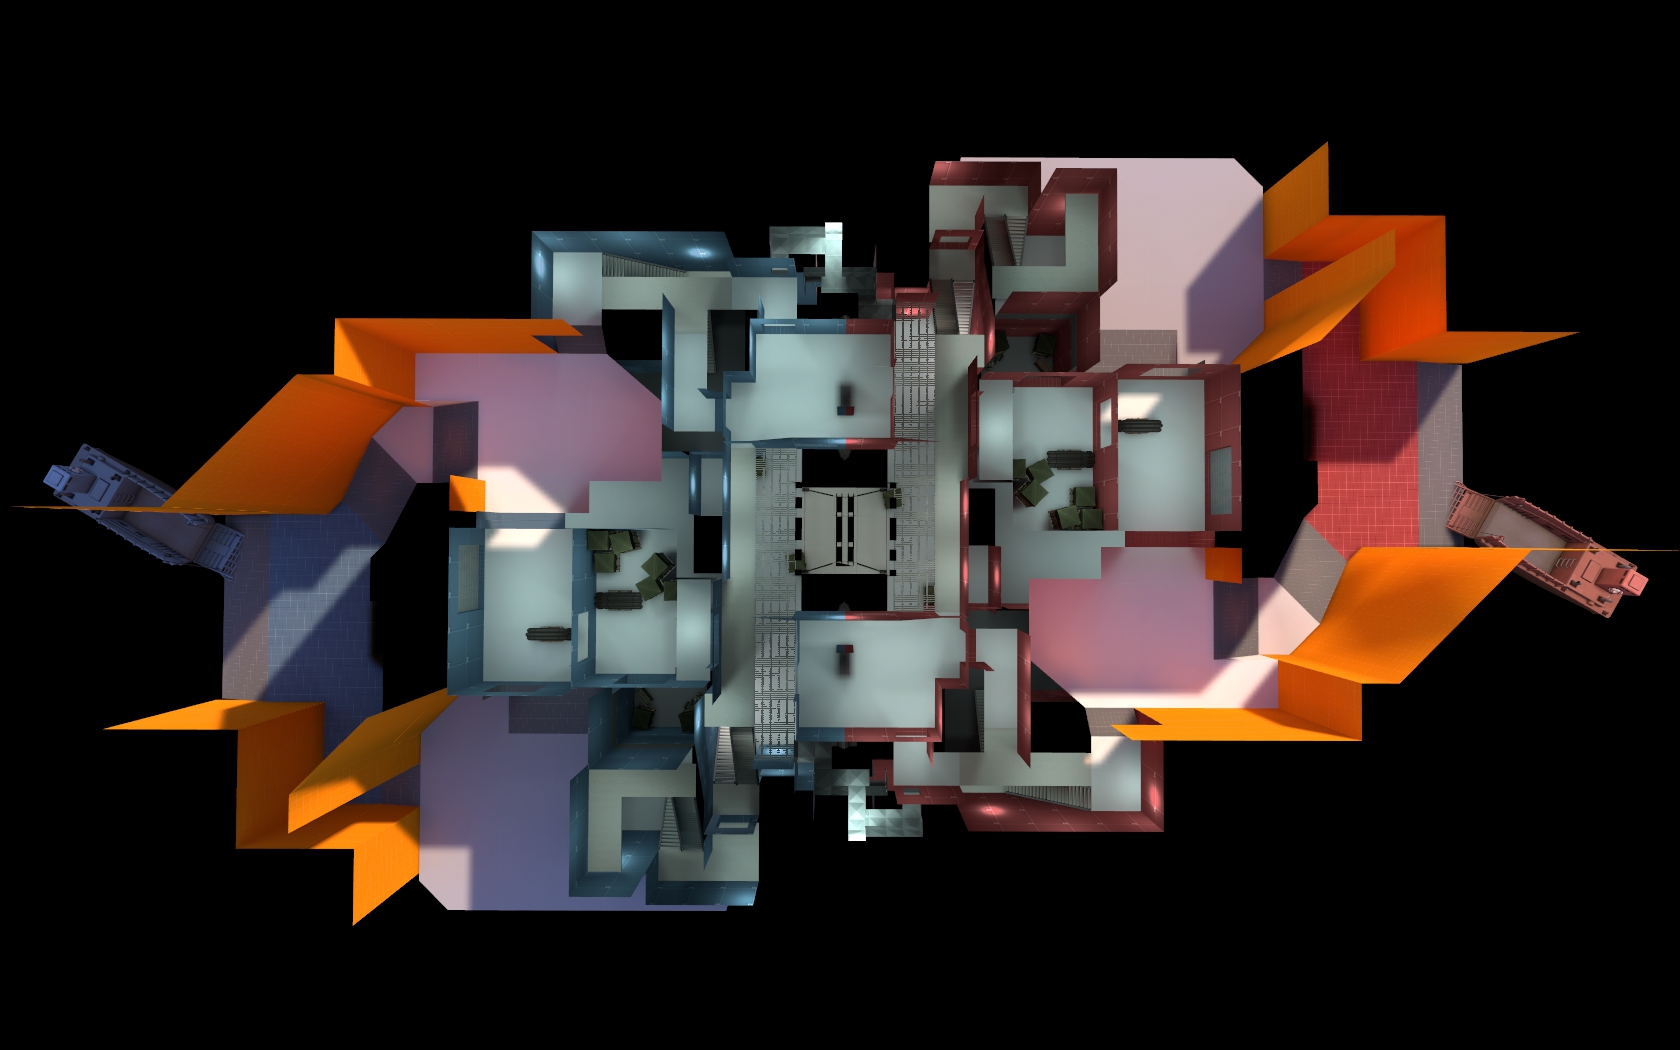 arena_wilco_a1_Overview.jpg